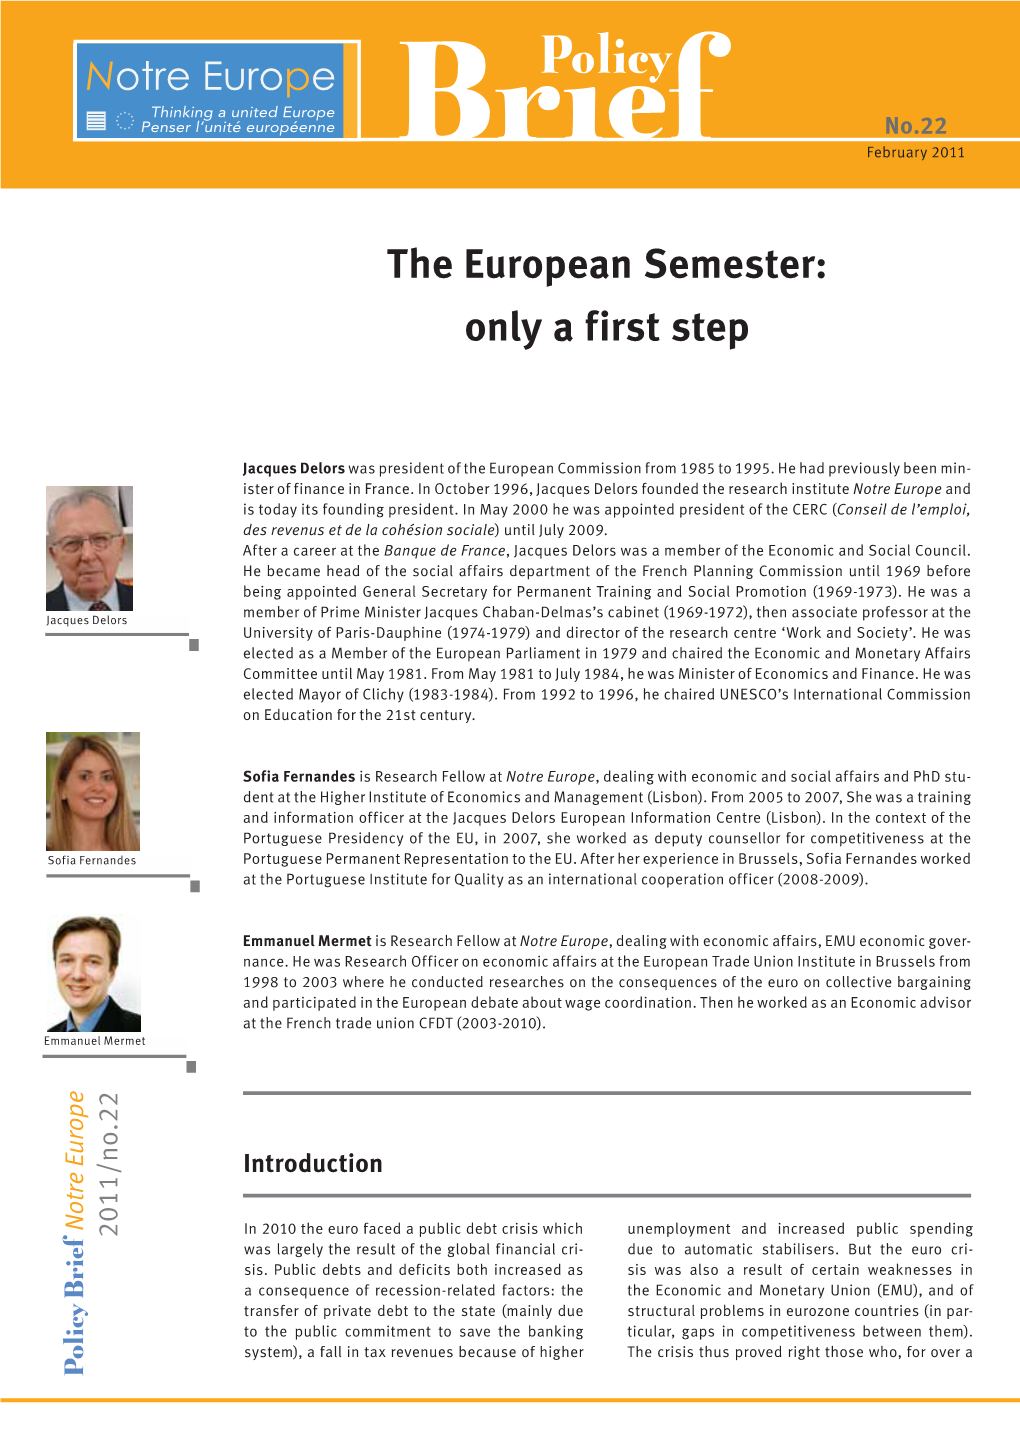 The European Semester: Only a First Step